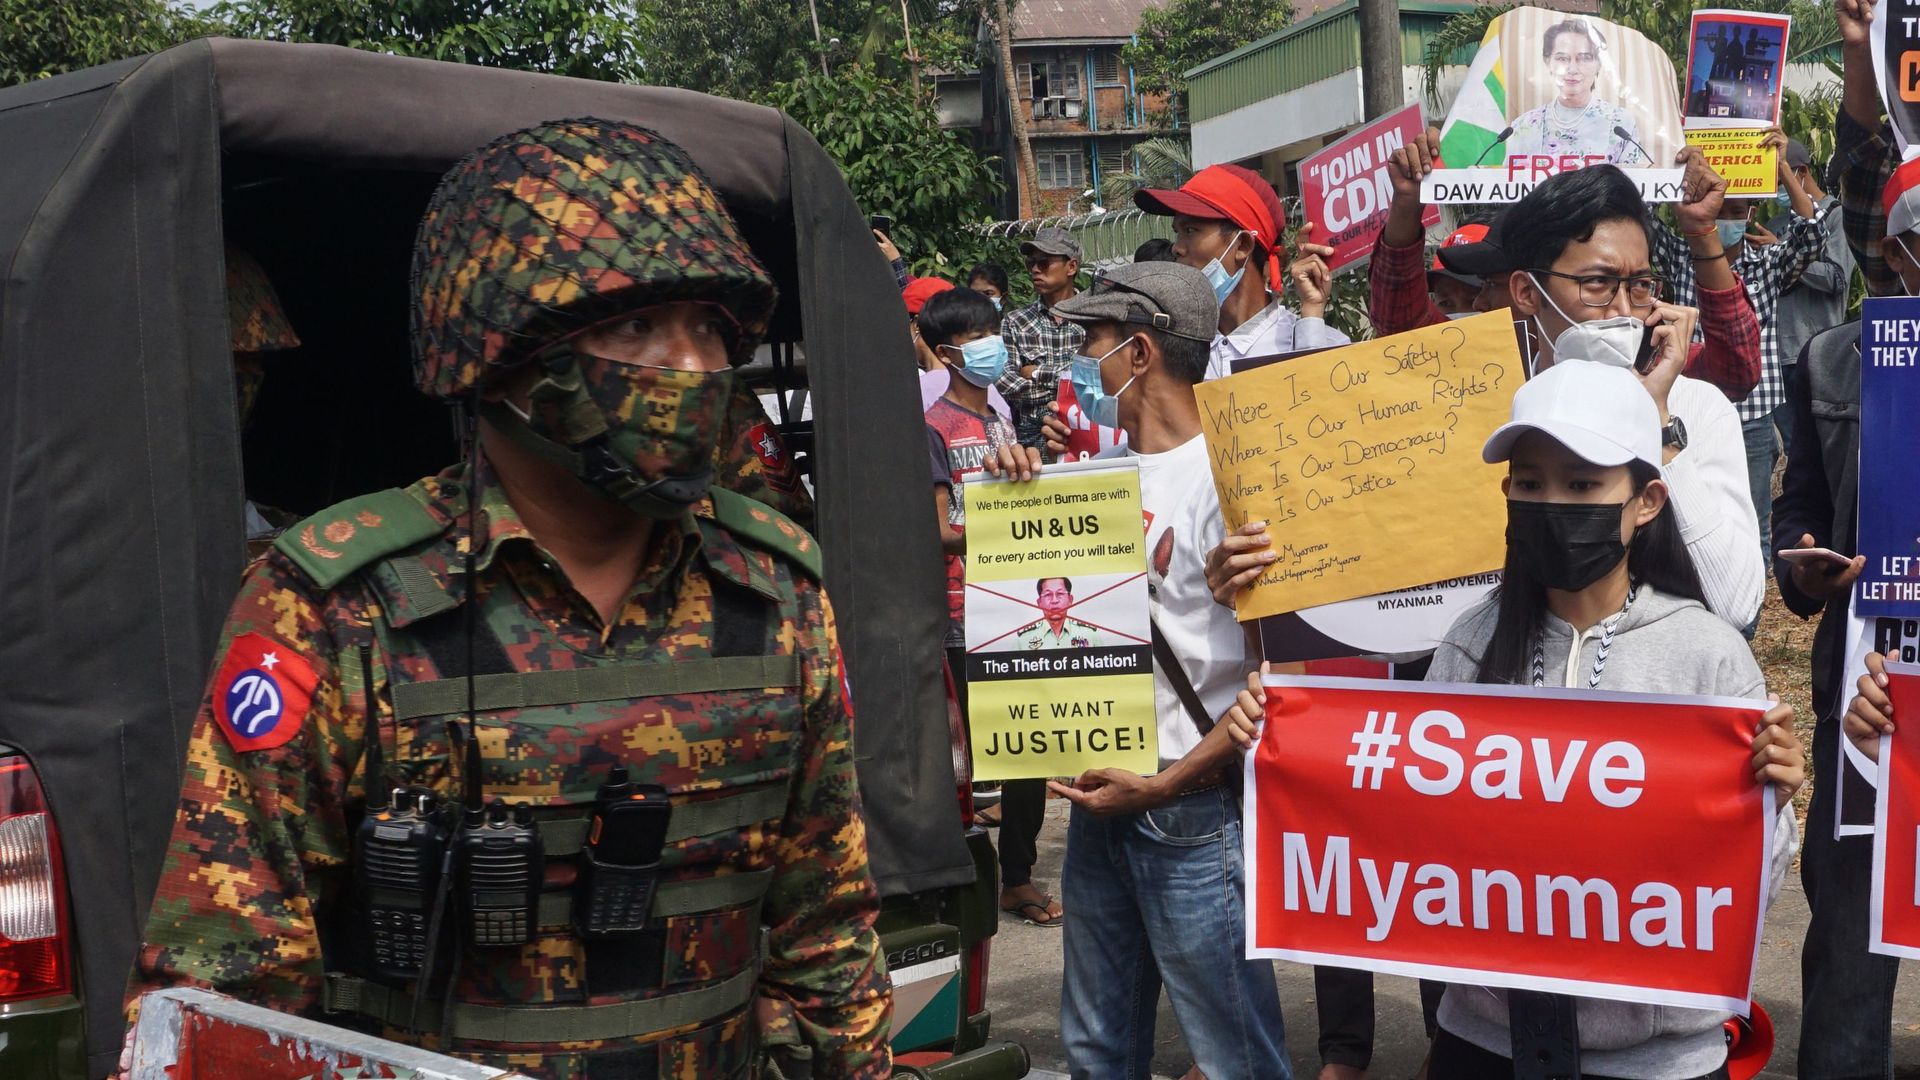 A soldier stands guard next to protesters holding signs during a demonstration against the military coup outside the Central Bank of Myanmar in Yangon on February 15